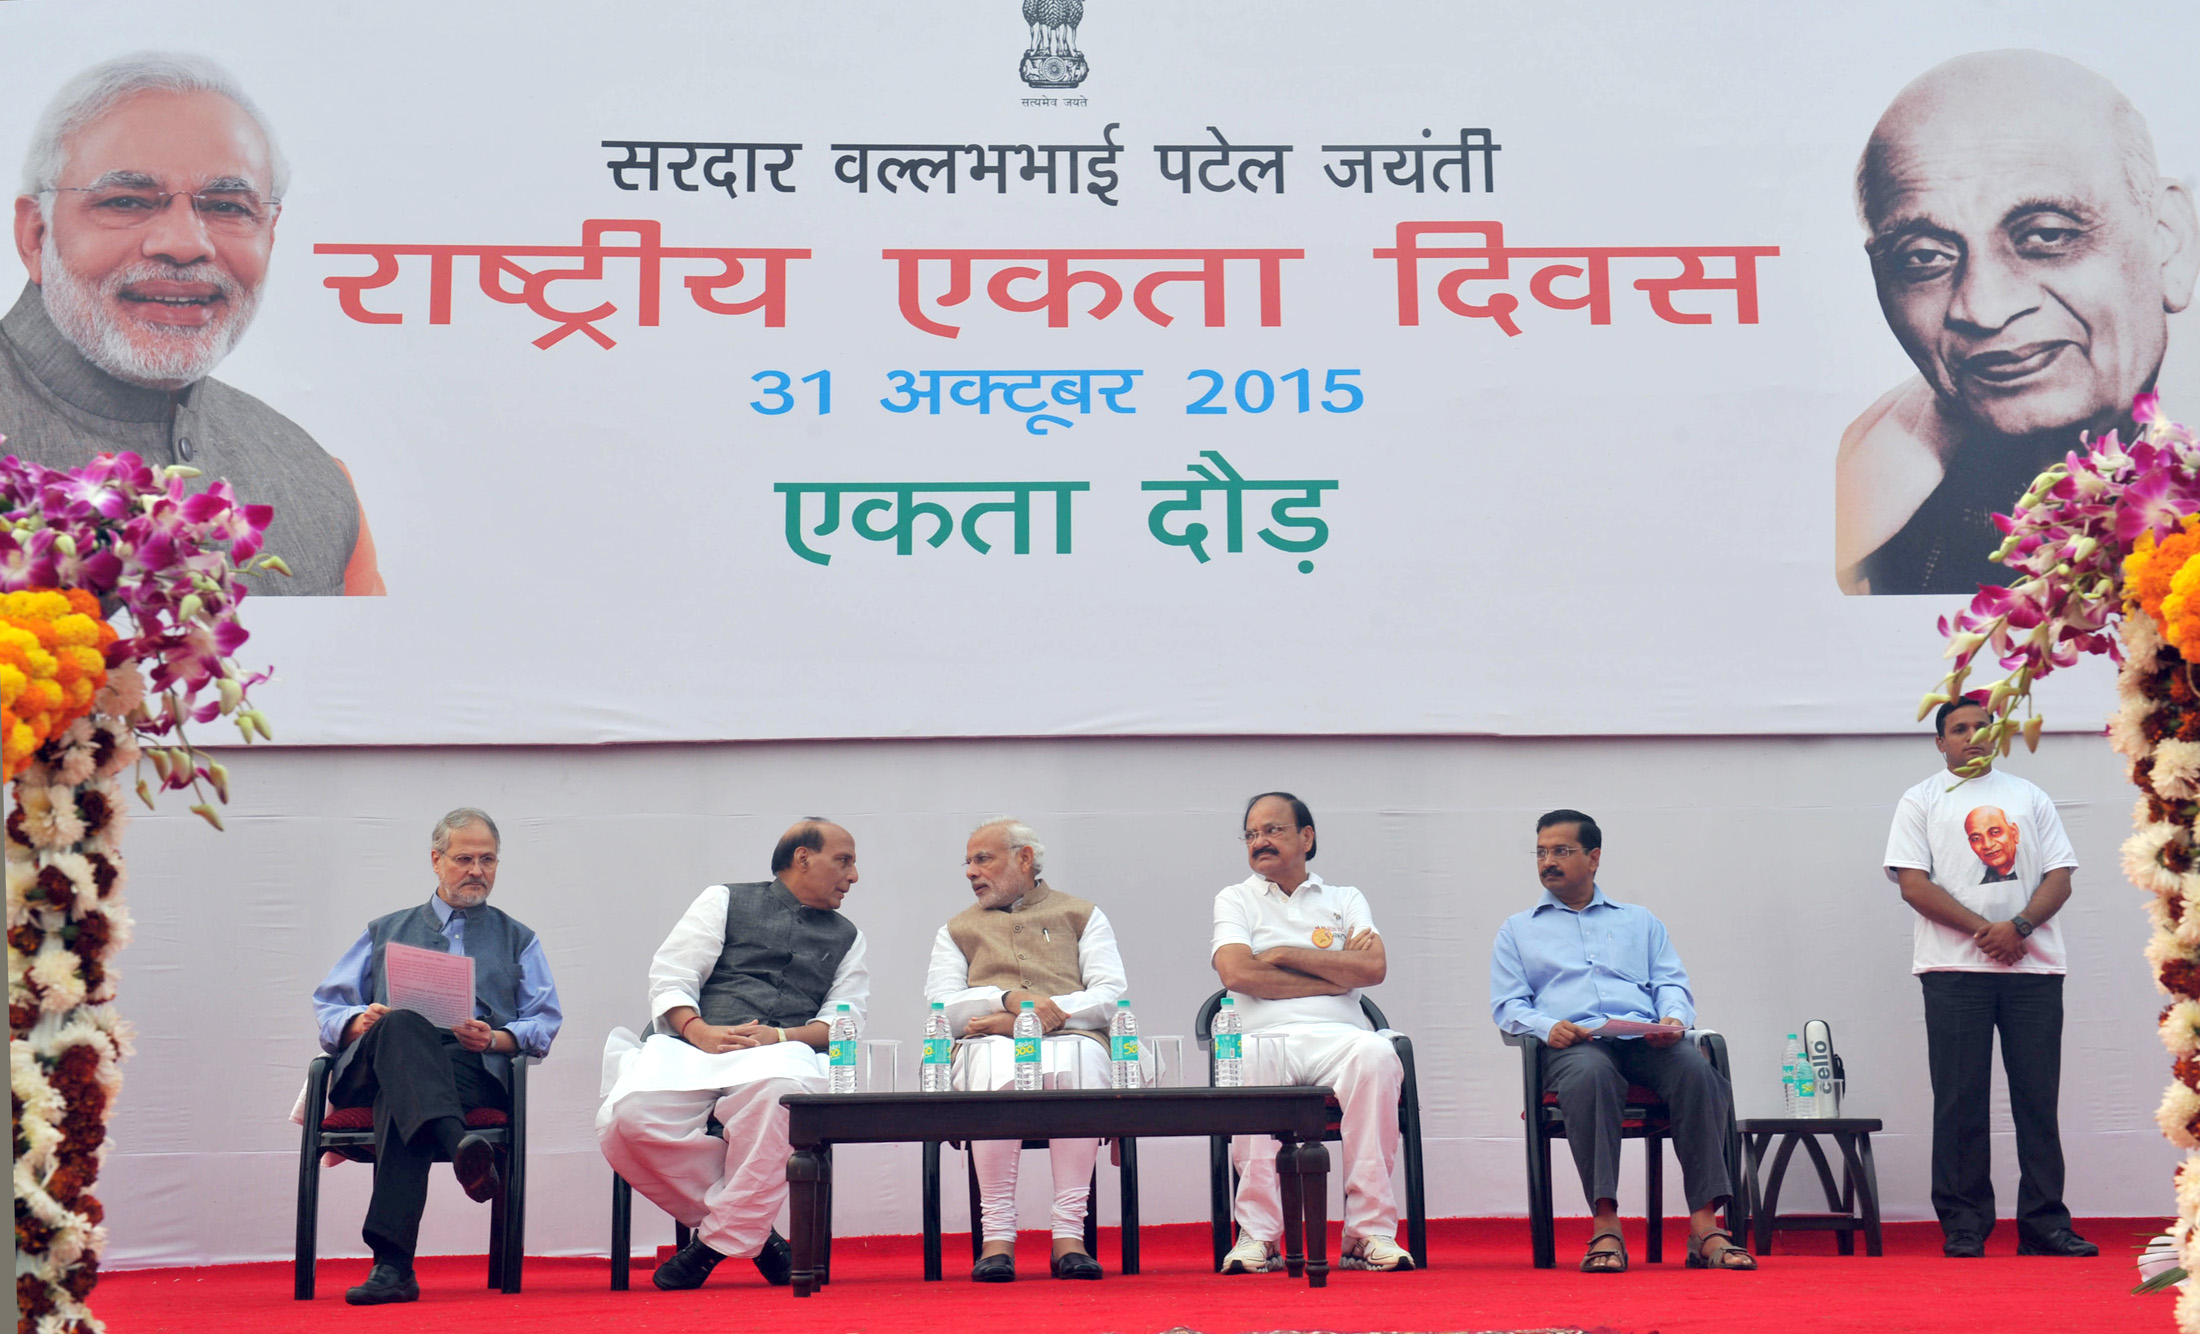 The Prime Minister, Shri Narendra Modi at the Run for Unity event, organised on Rashtriya Ekta Diwas, at Rajpath, in New Delhi on October 31, 2015. 	The Lt. Governor of Delhi, Shri Najeeb Jung, the Union Home Minister, Shri Rajnath Singh, the Union Minister for Urban Development, Housing and Urban Poverty Alleviation and Parliamentary Affairs, Shri M. Venkaiah Naidu and the Chief Minister of Delhi, Shri Arvind Kejriwal are also seen.